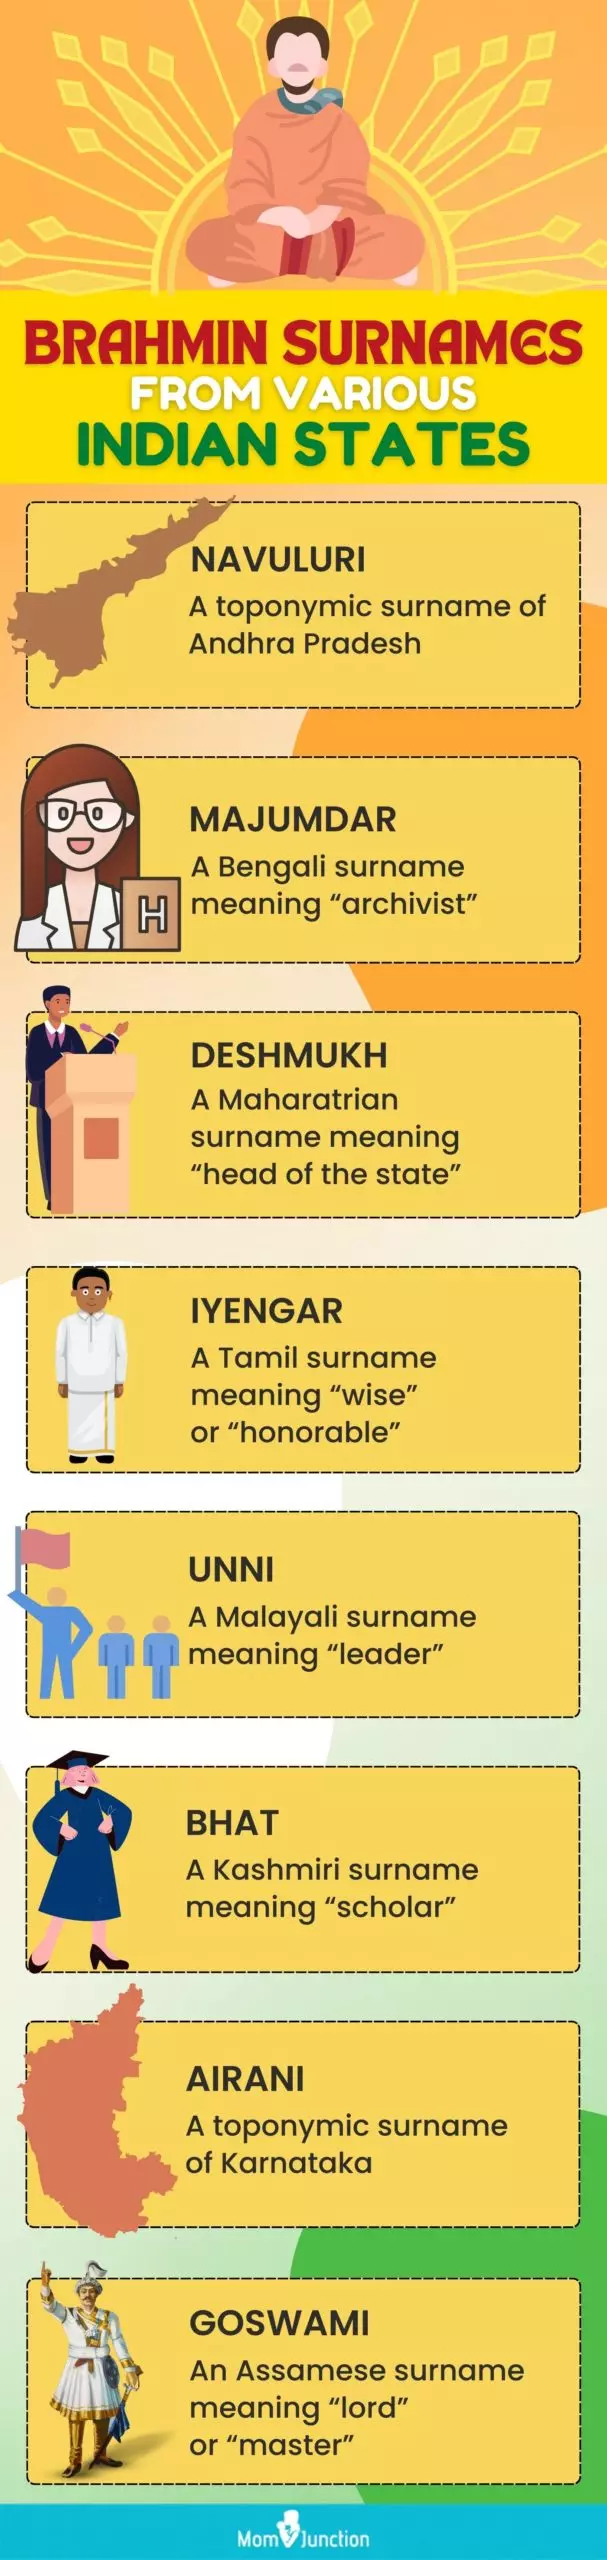 brahmin surnames from various indian states (infographic)